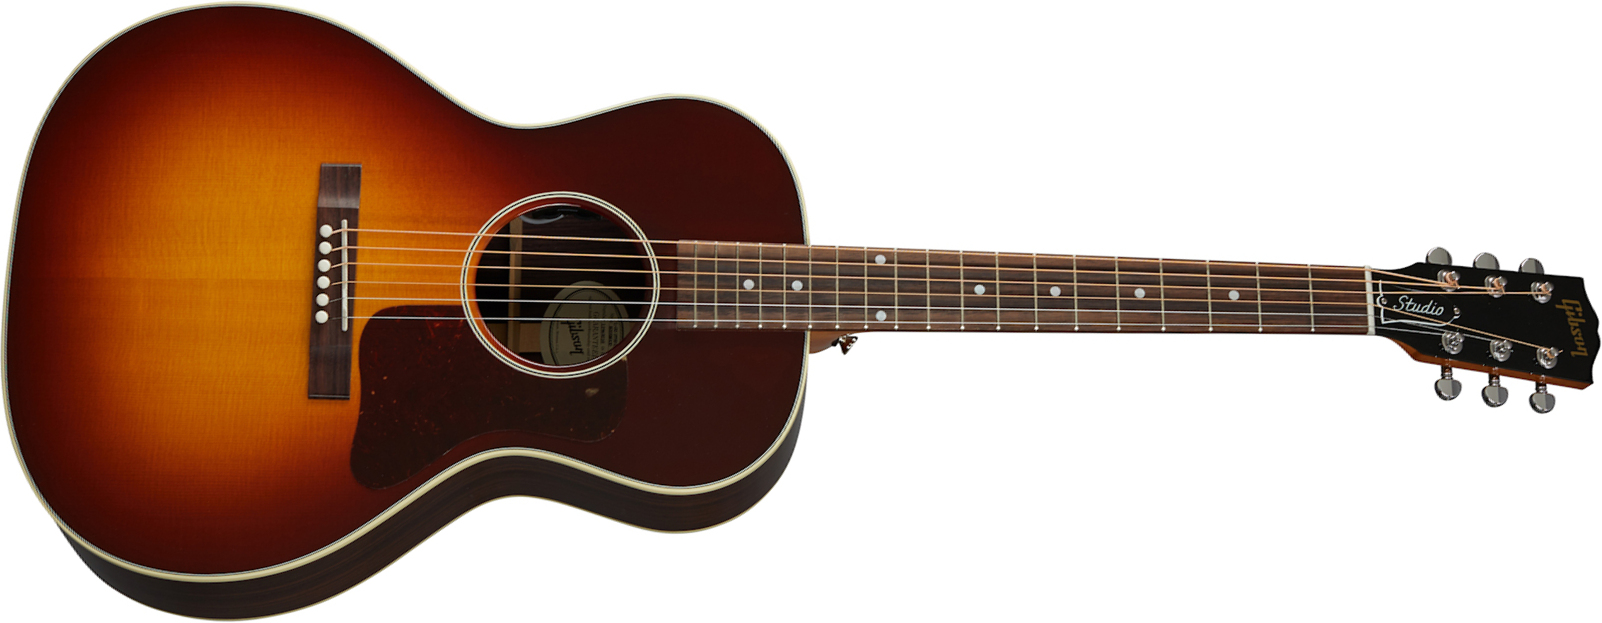 Gibson L-00 Studio Rosewood Modern 2020 Parlor Epicea Palissandre Rw - Rosewood Burst - Electro acoustic guitar - Main picture